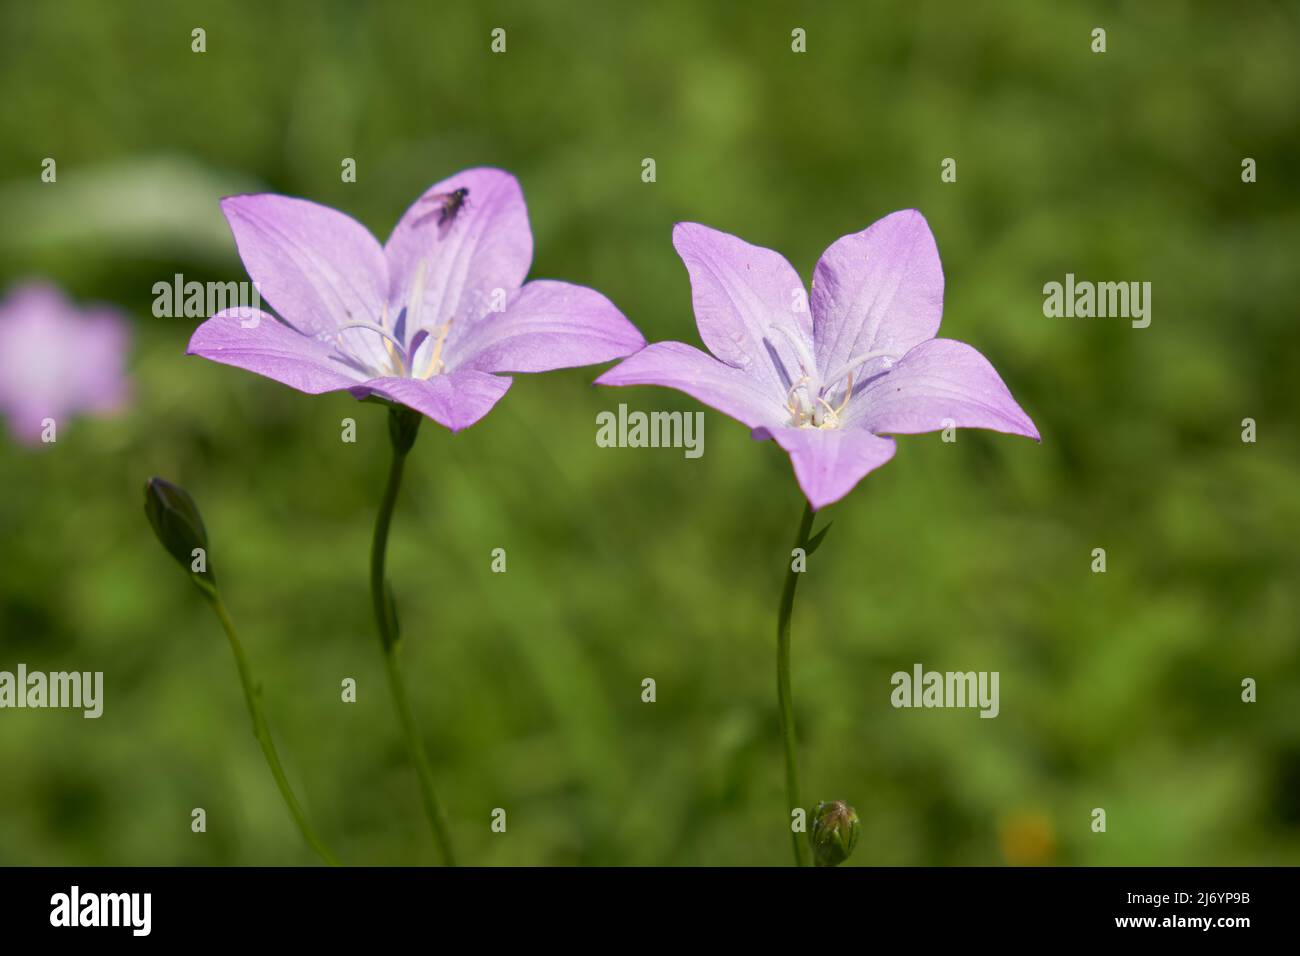 Campanula altaica, known as bellflowers in natural environment. Altai mountains. Stock Photo